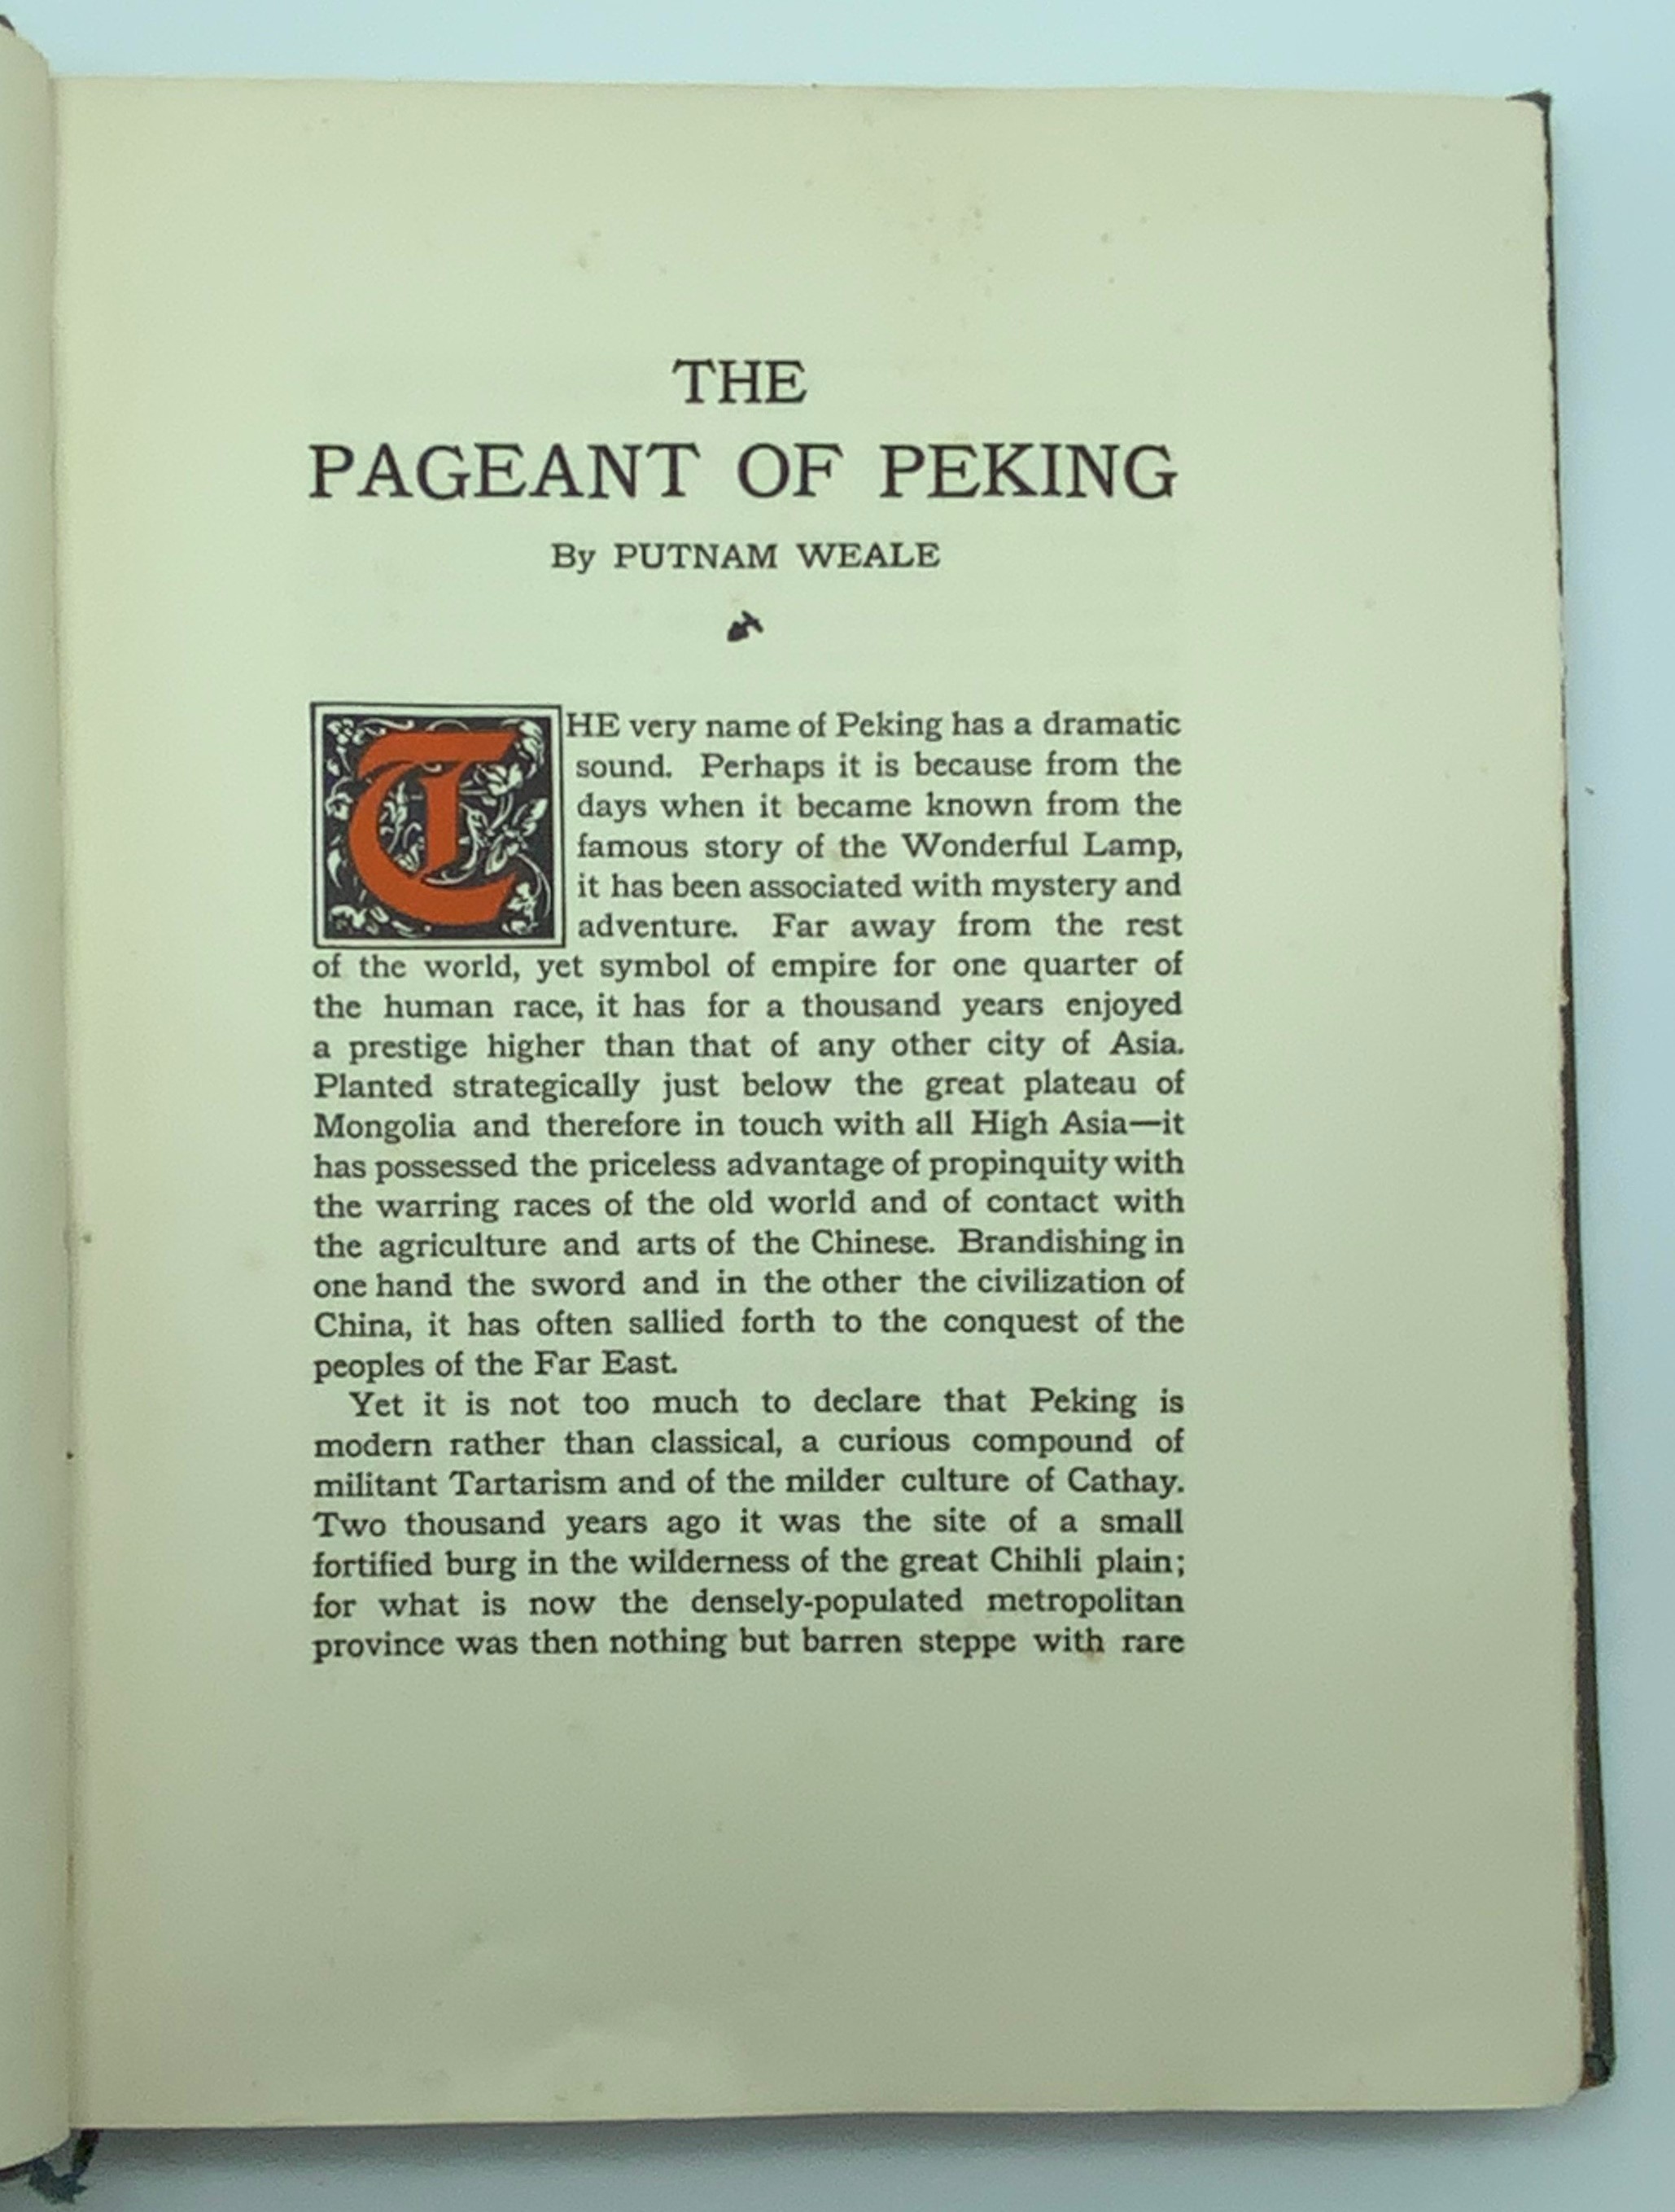 THE PAGEANT OF PEKING BY DONALD MENNIE 1920 LIMITED EDITION (701/1000)